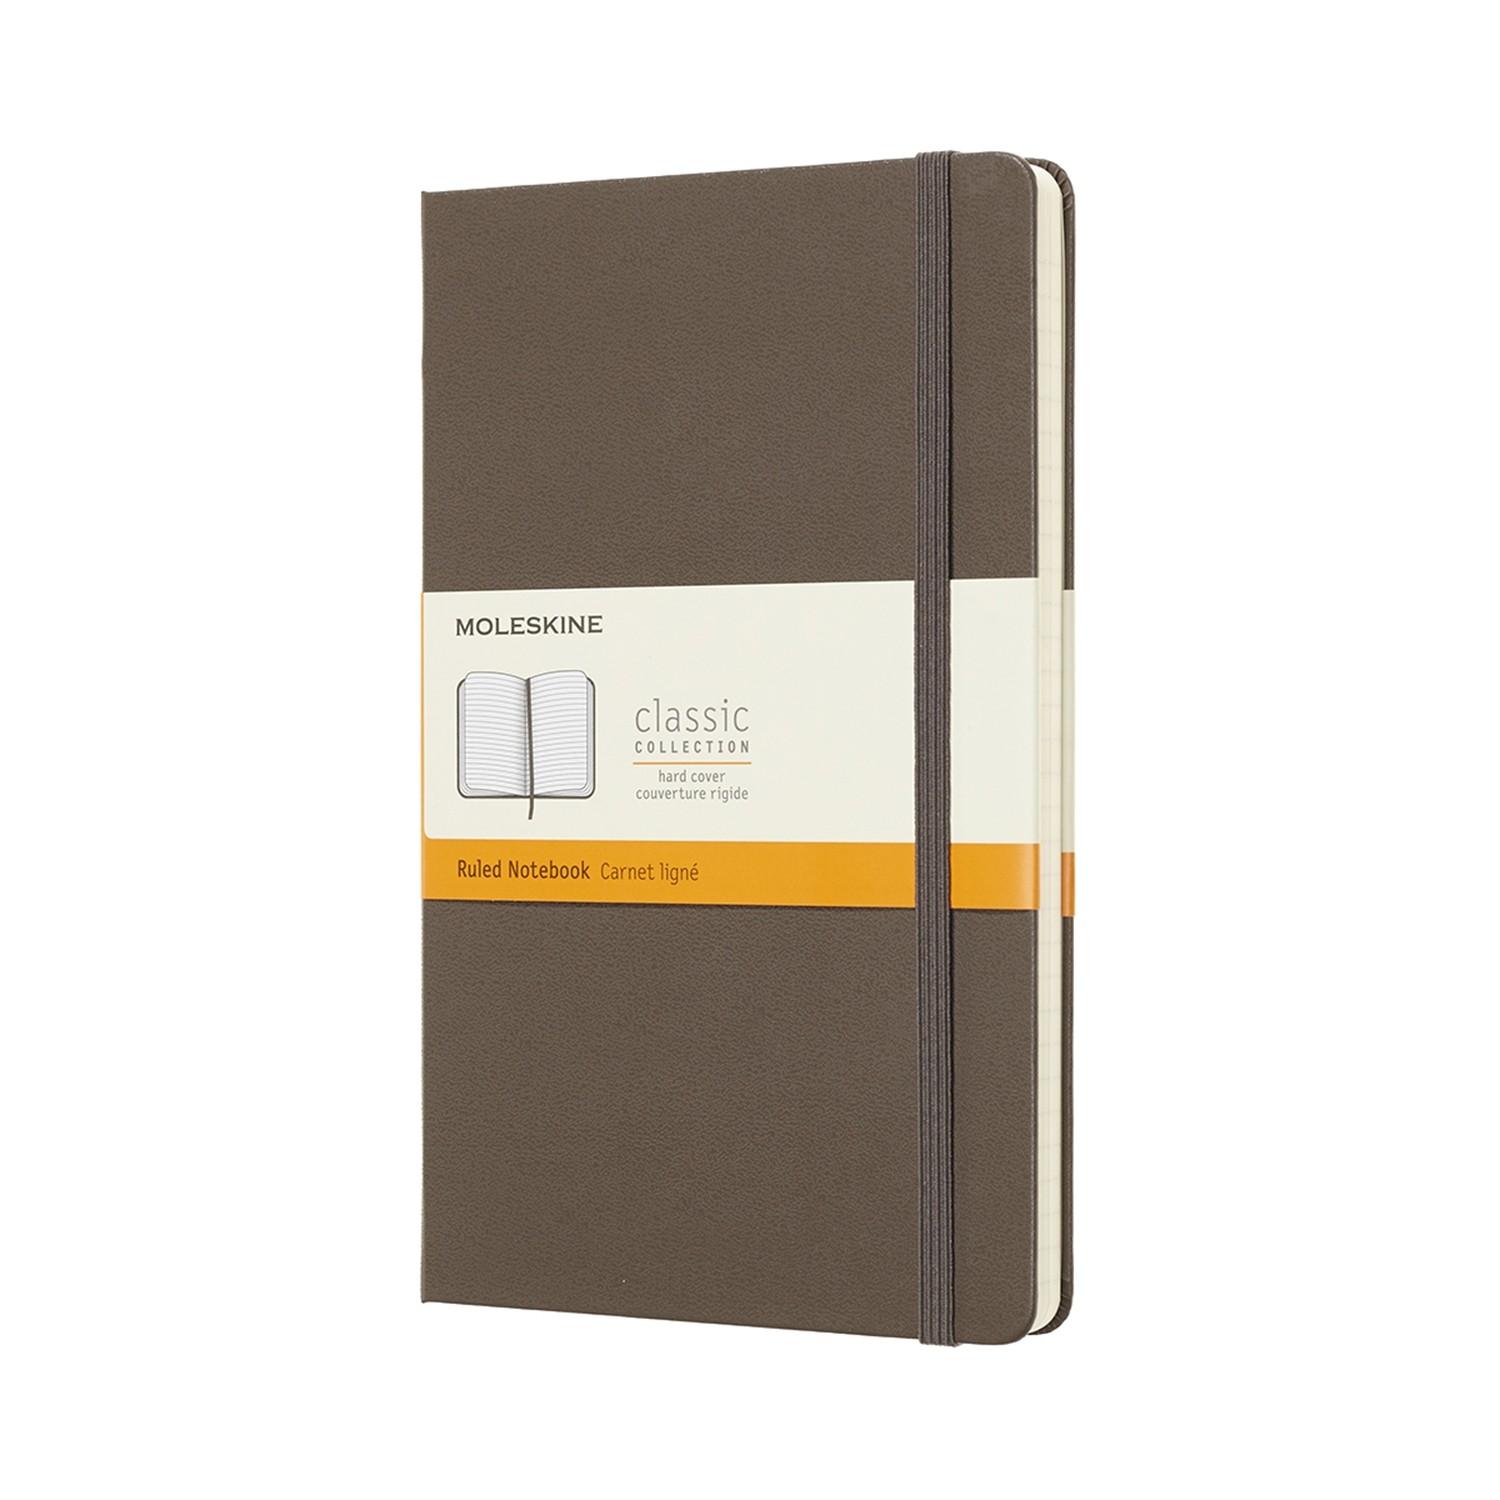 Moleskine Notebook Large Ruled Earth Brown Hard CoVER